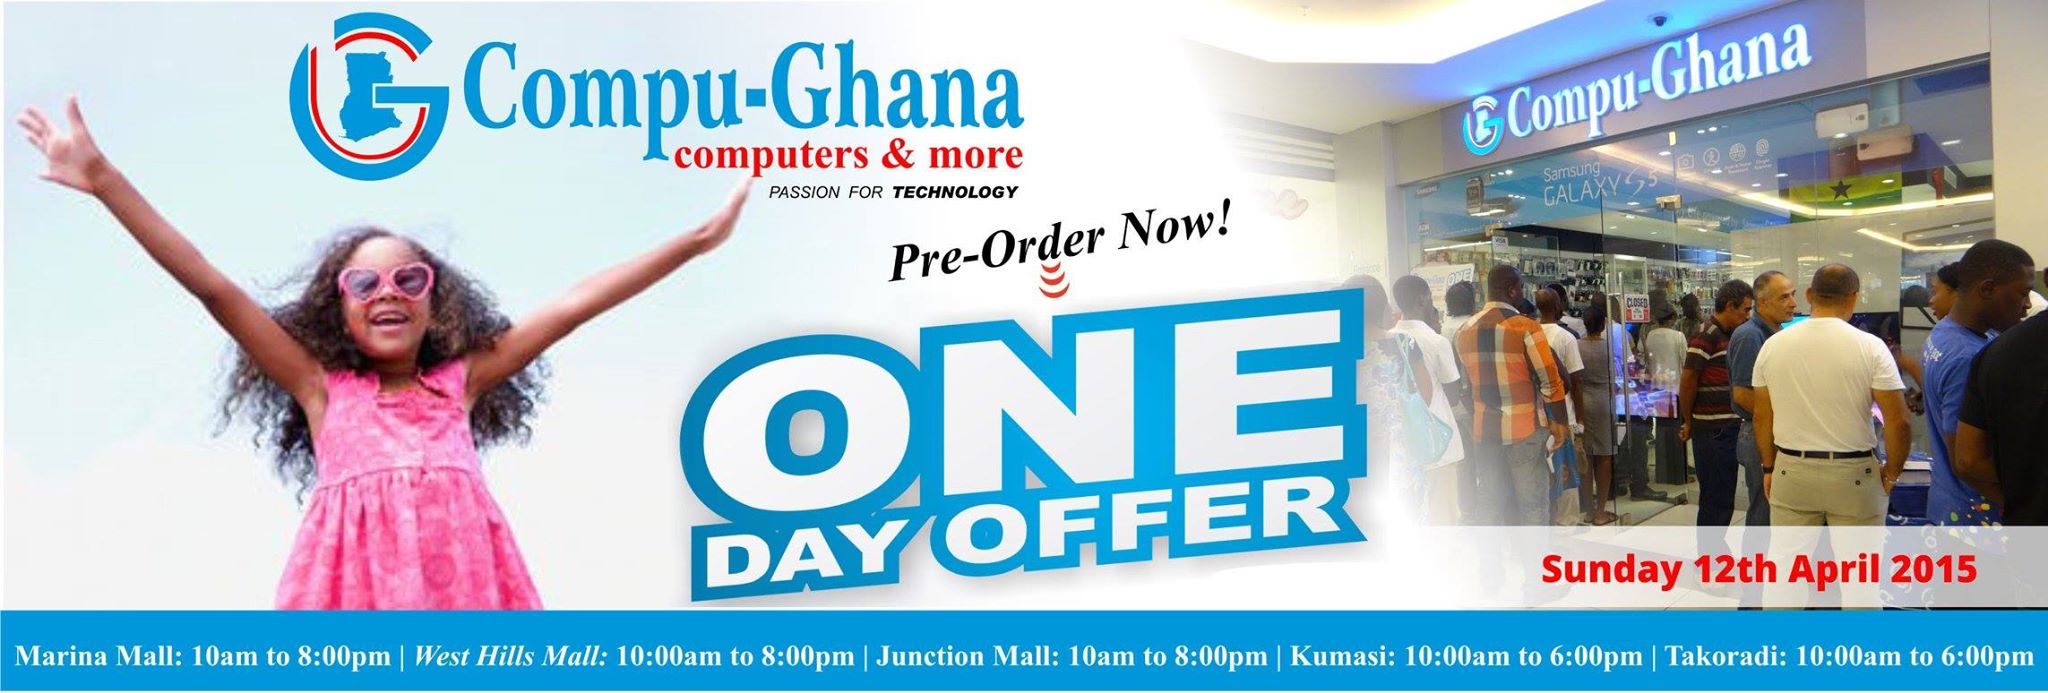 Lumia Phones  prices  slashed in Compu-Ghana’s First Promo of the year.